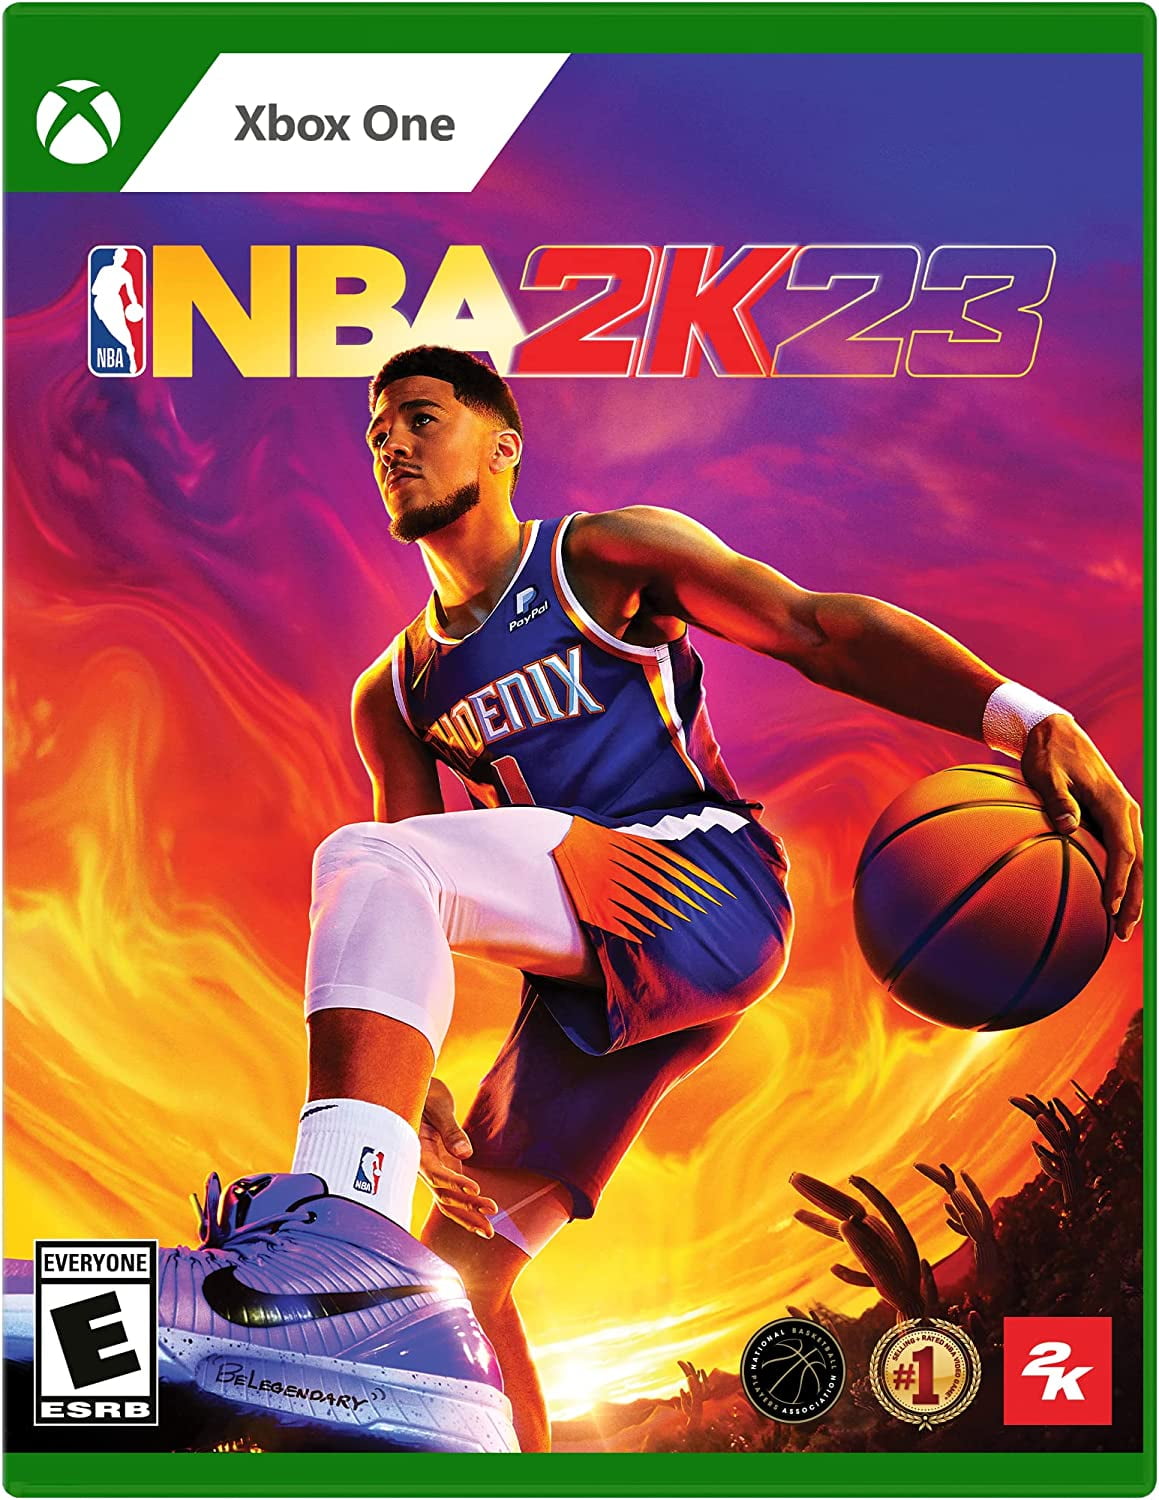 My Take on the 2k23 Cover : r/NBA2k